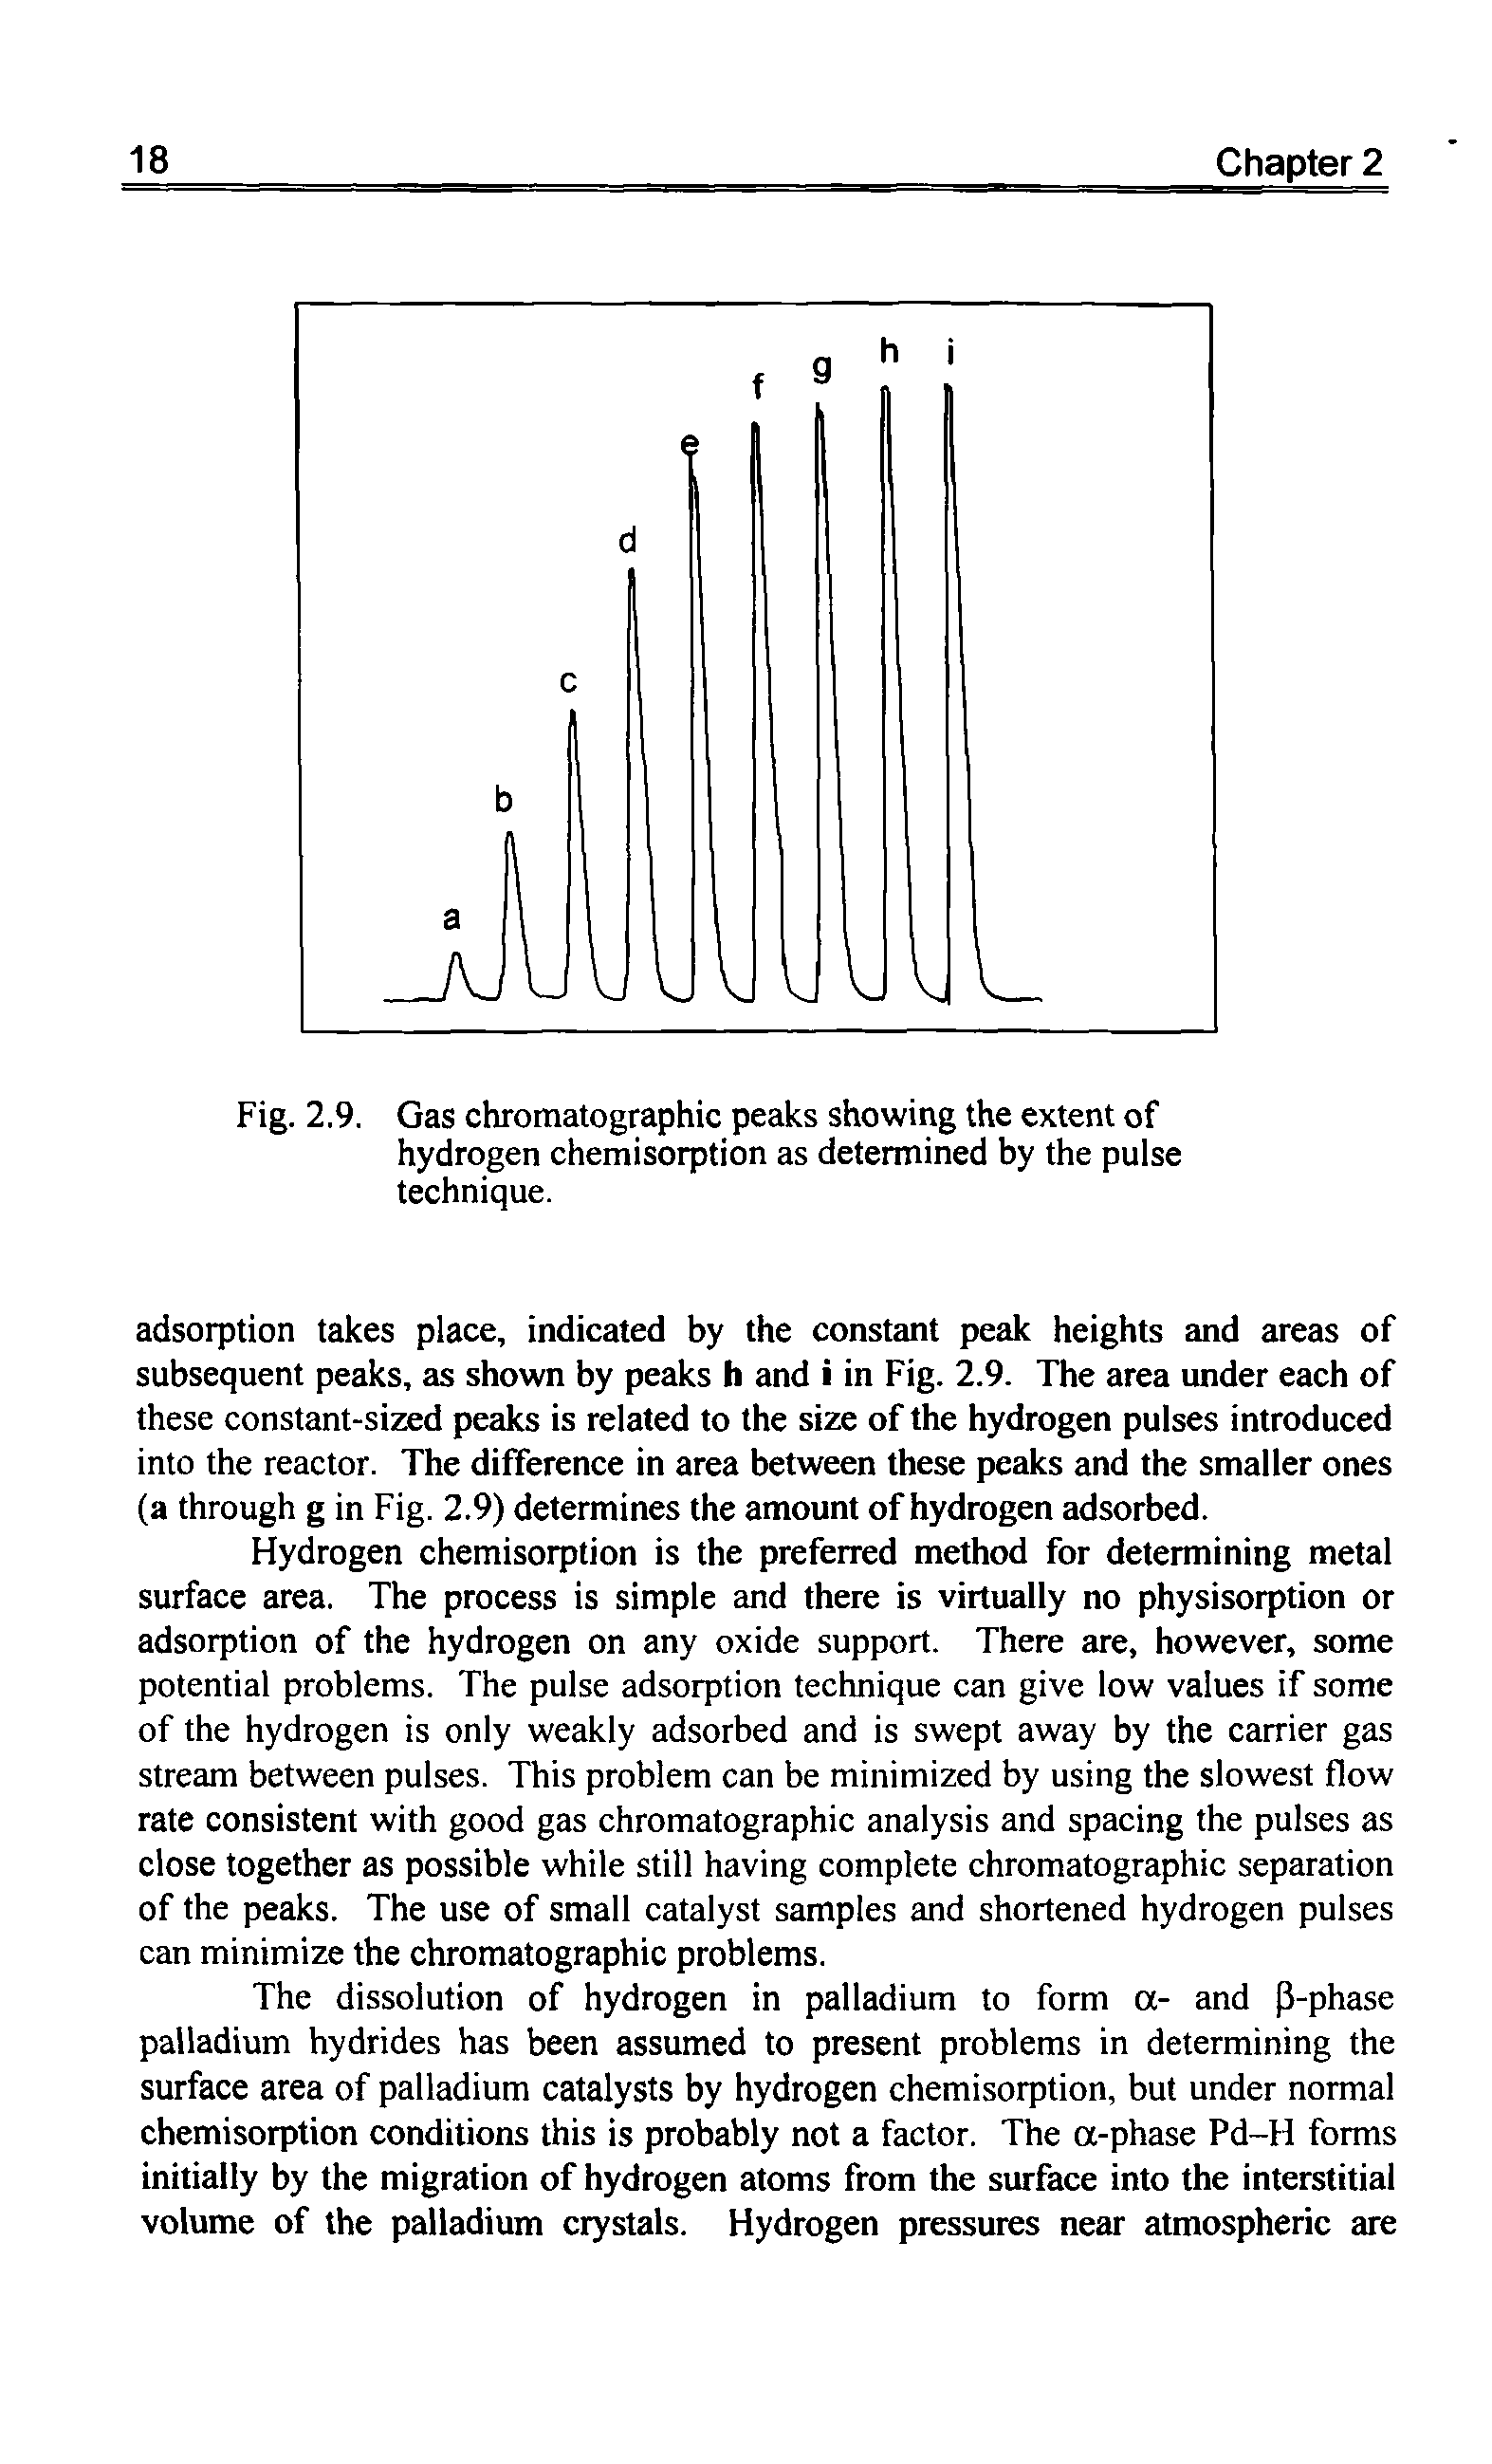 Fig. 2,9. Gas chromatographic peaks showing the extent of hydrogen chemisorption as determined by the pulse technique.